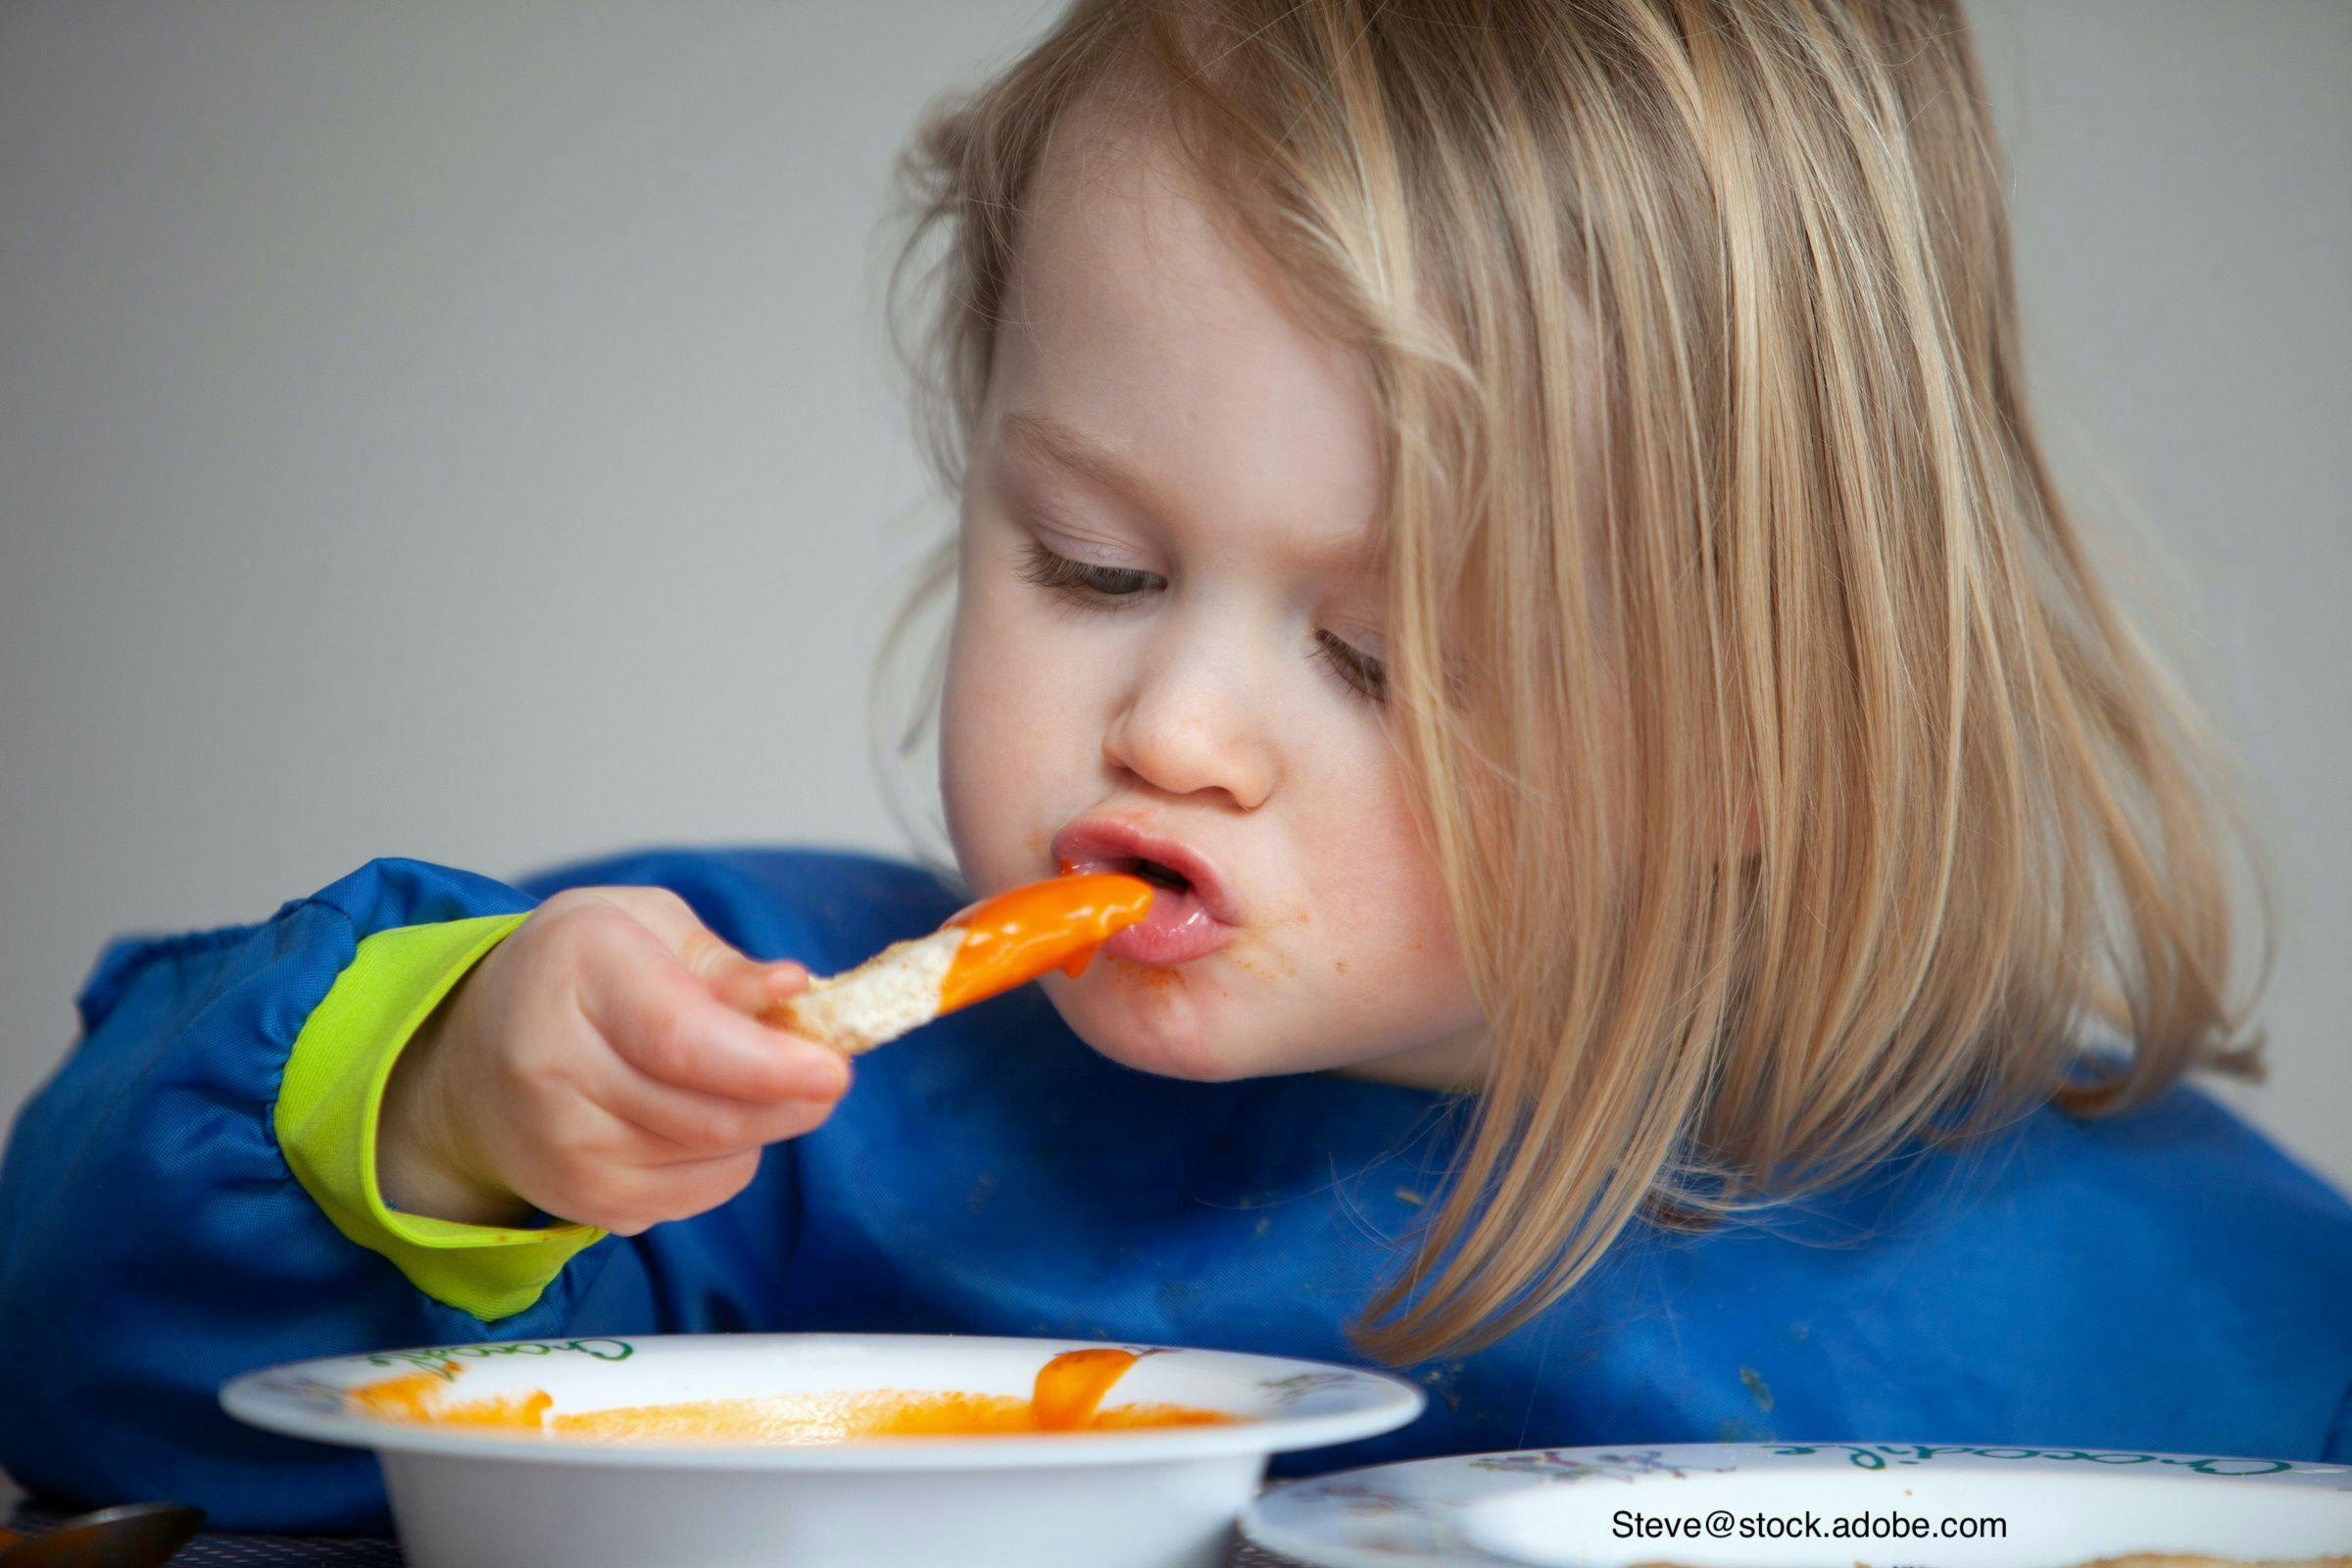 Looking at diets in early childhood